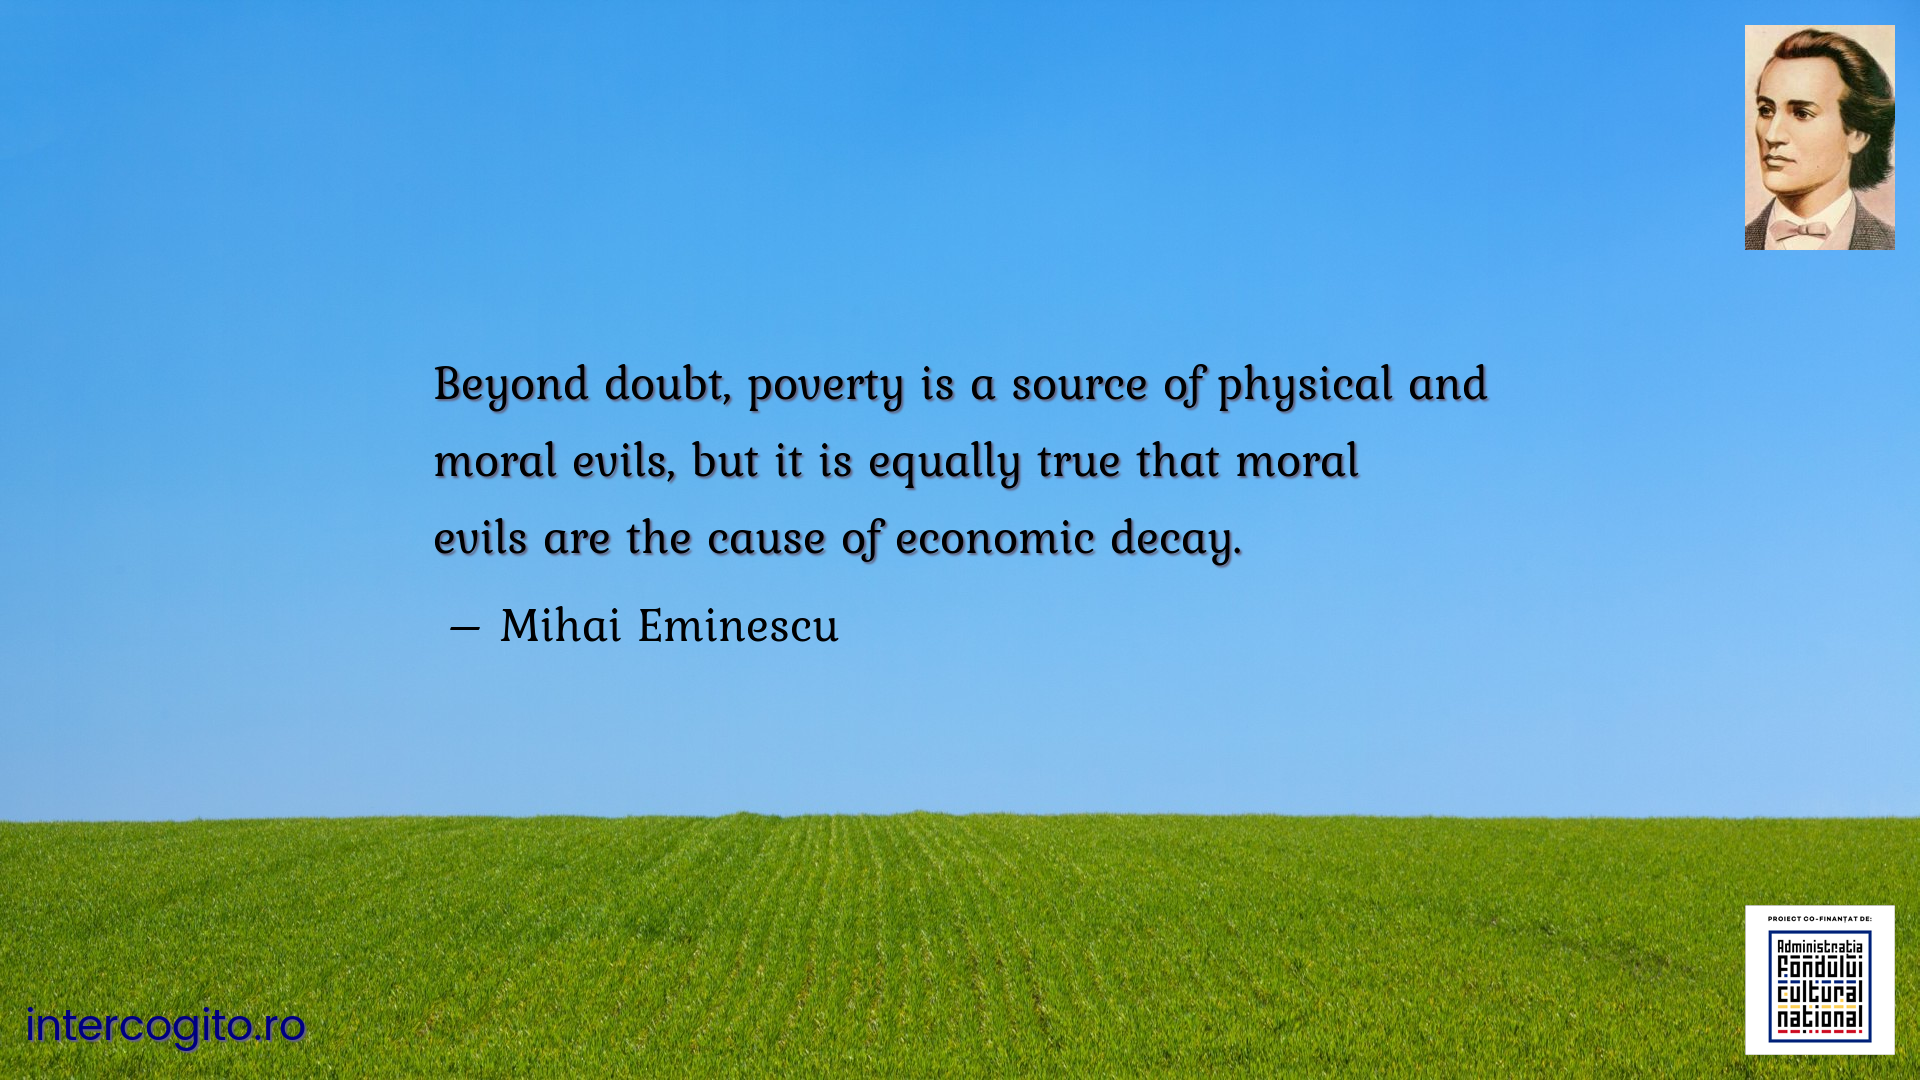 Beyond doubt, poverty is a source of physical and moral evils, but it is equally true that moral evils are the cause of economic decay.